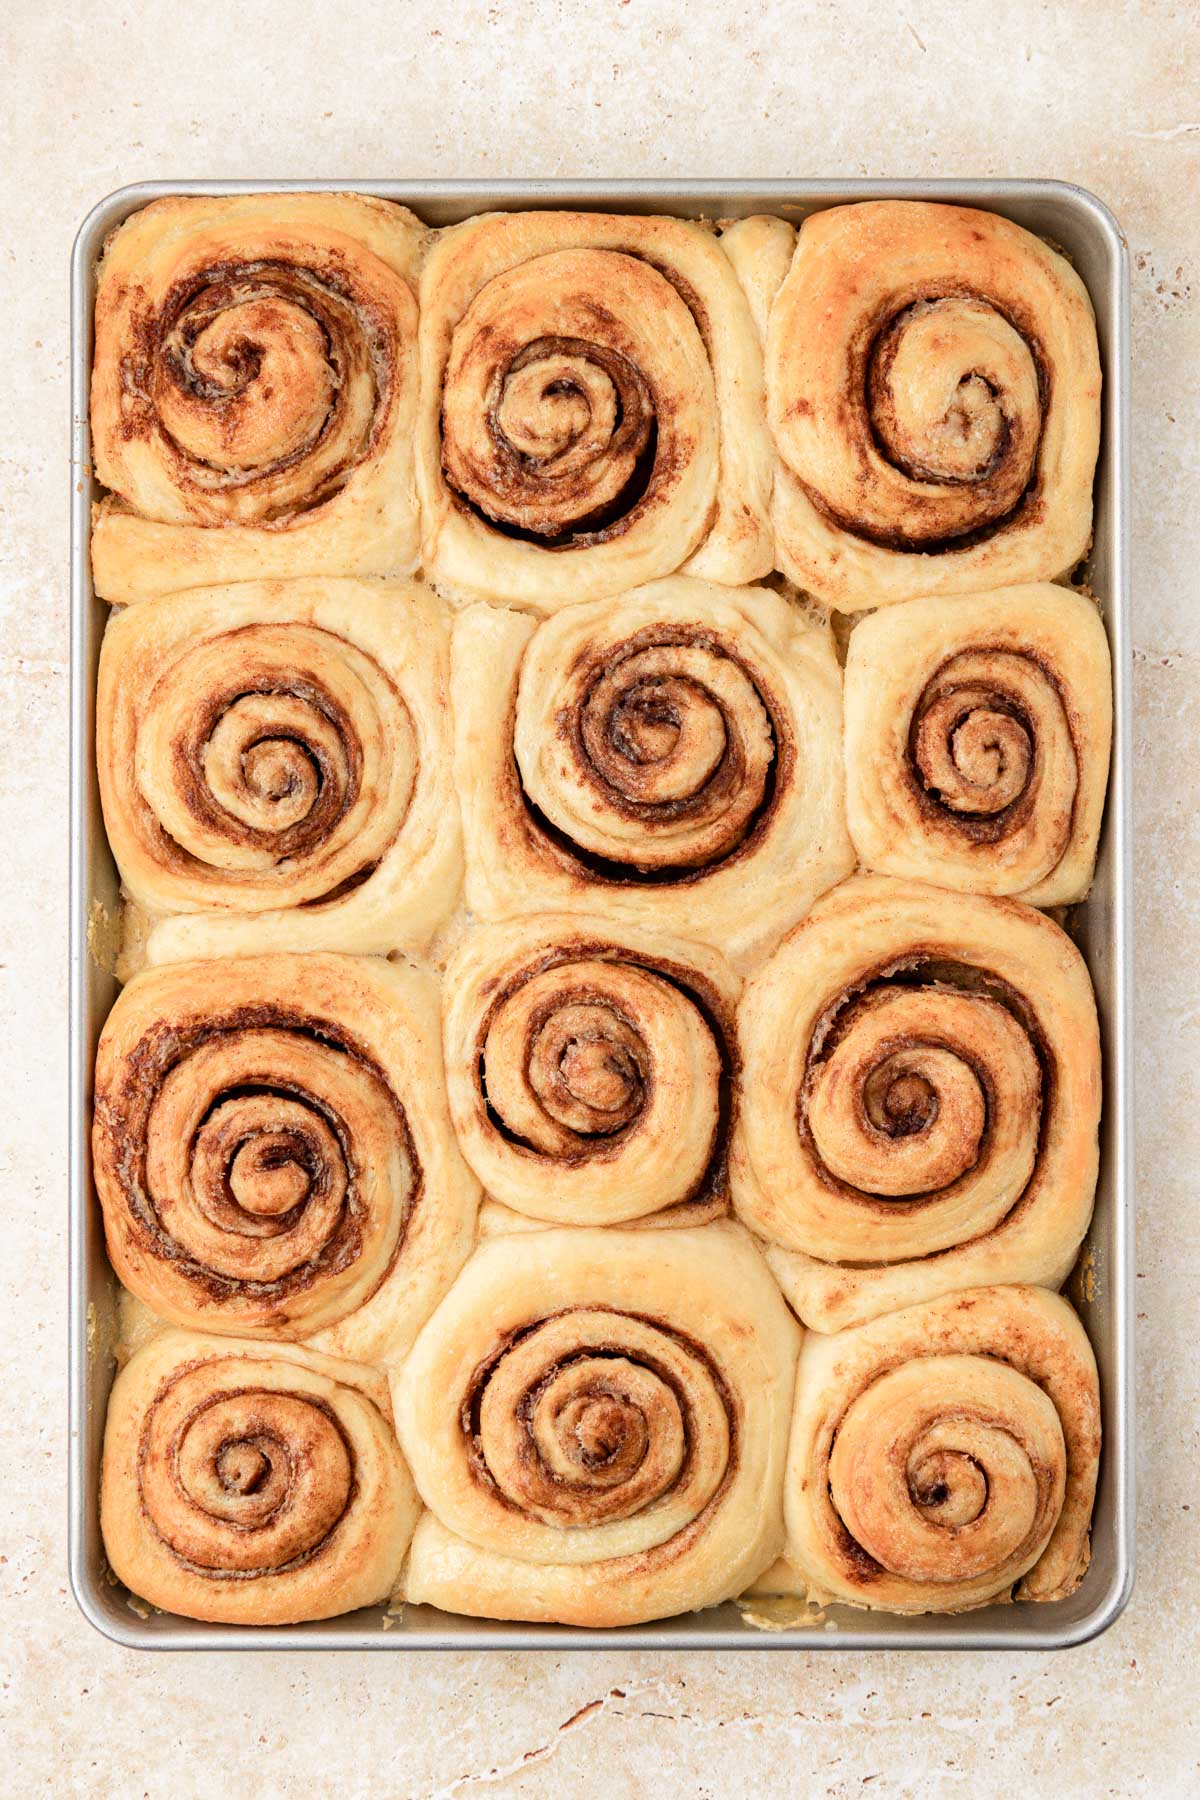 Cinnamon rolls baked up in a pan.